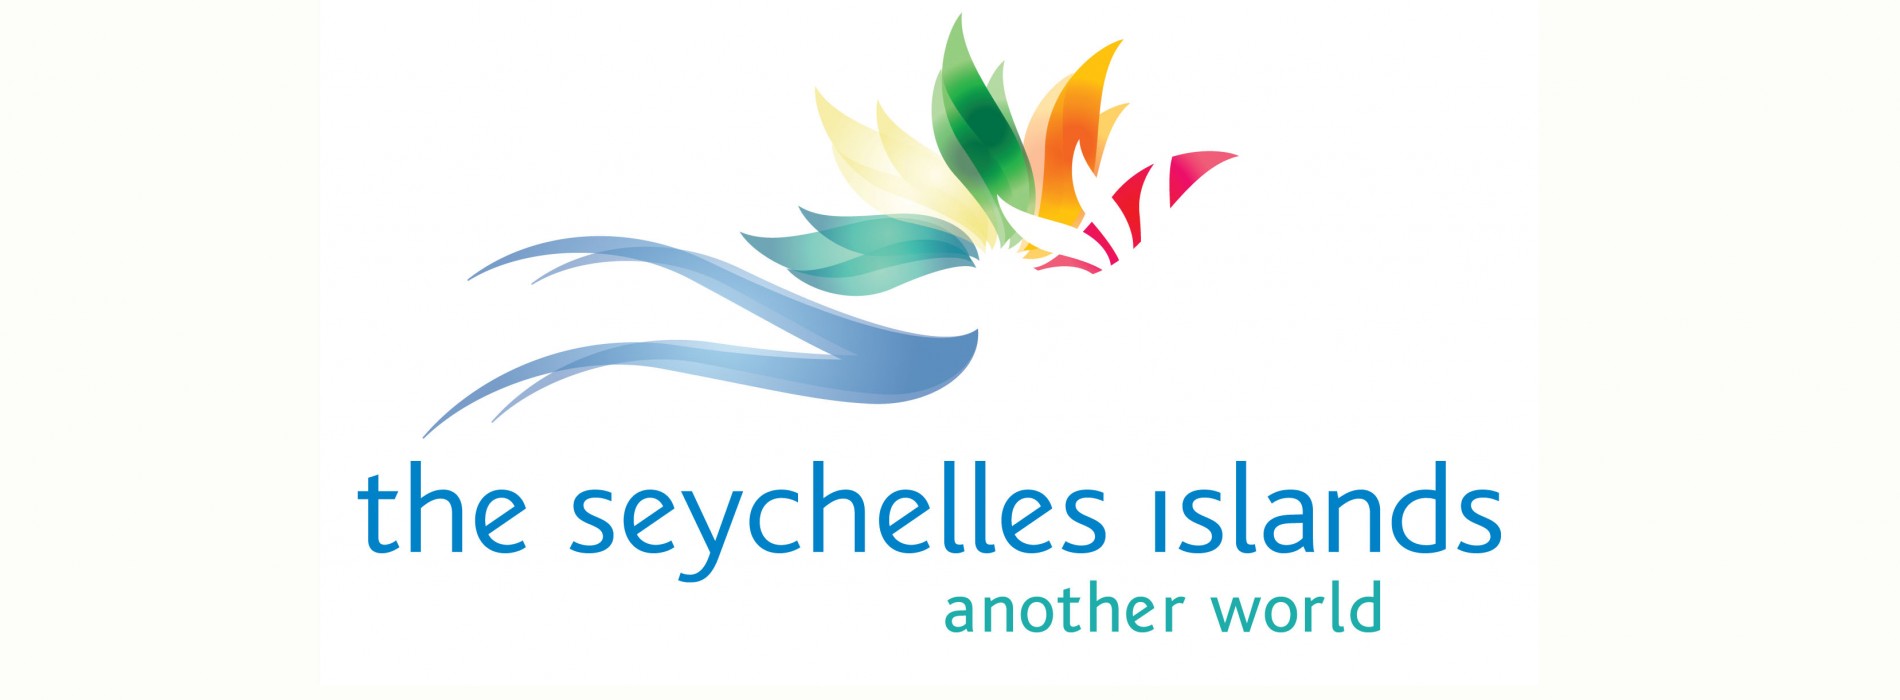 India continues to bring in numbers to Seychelles